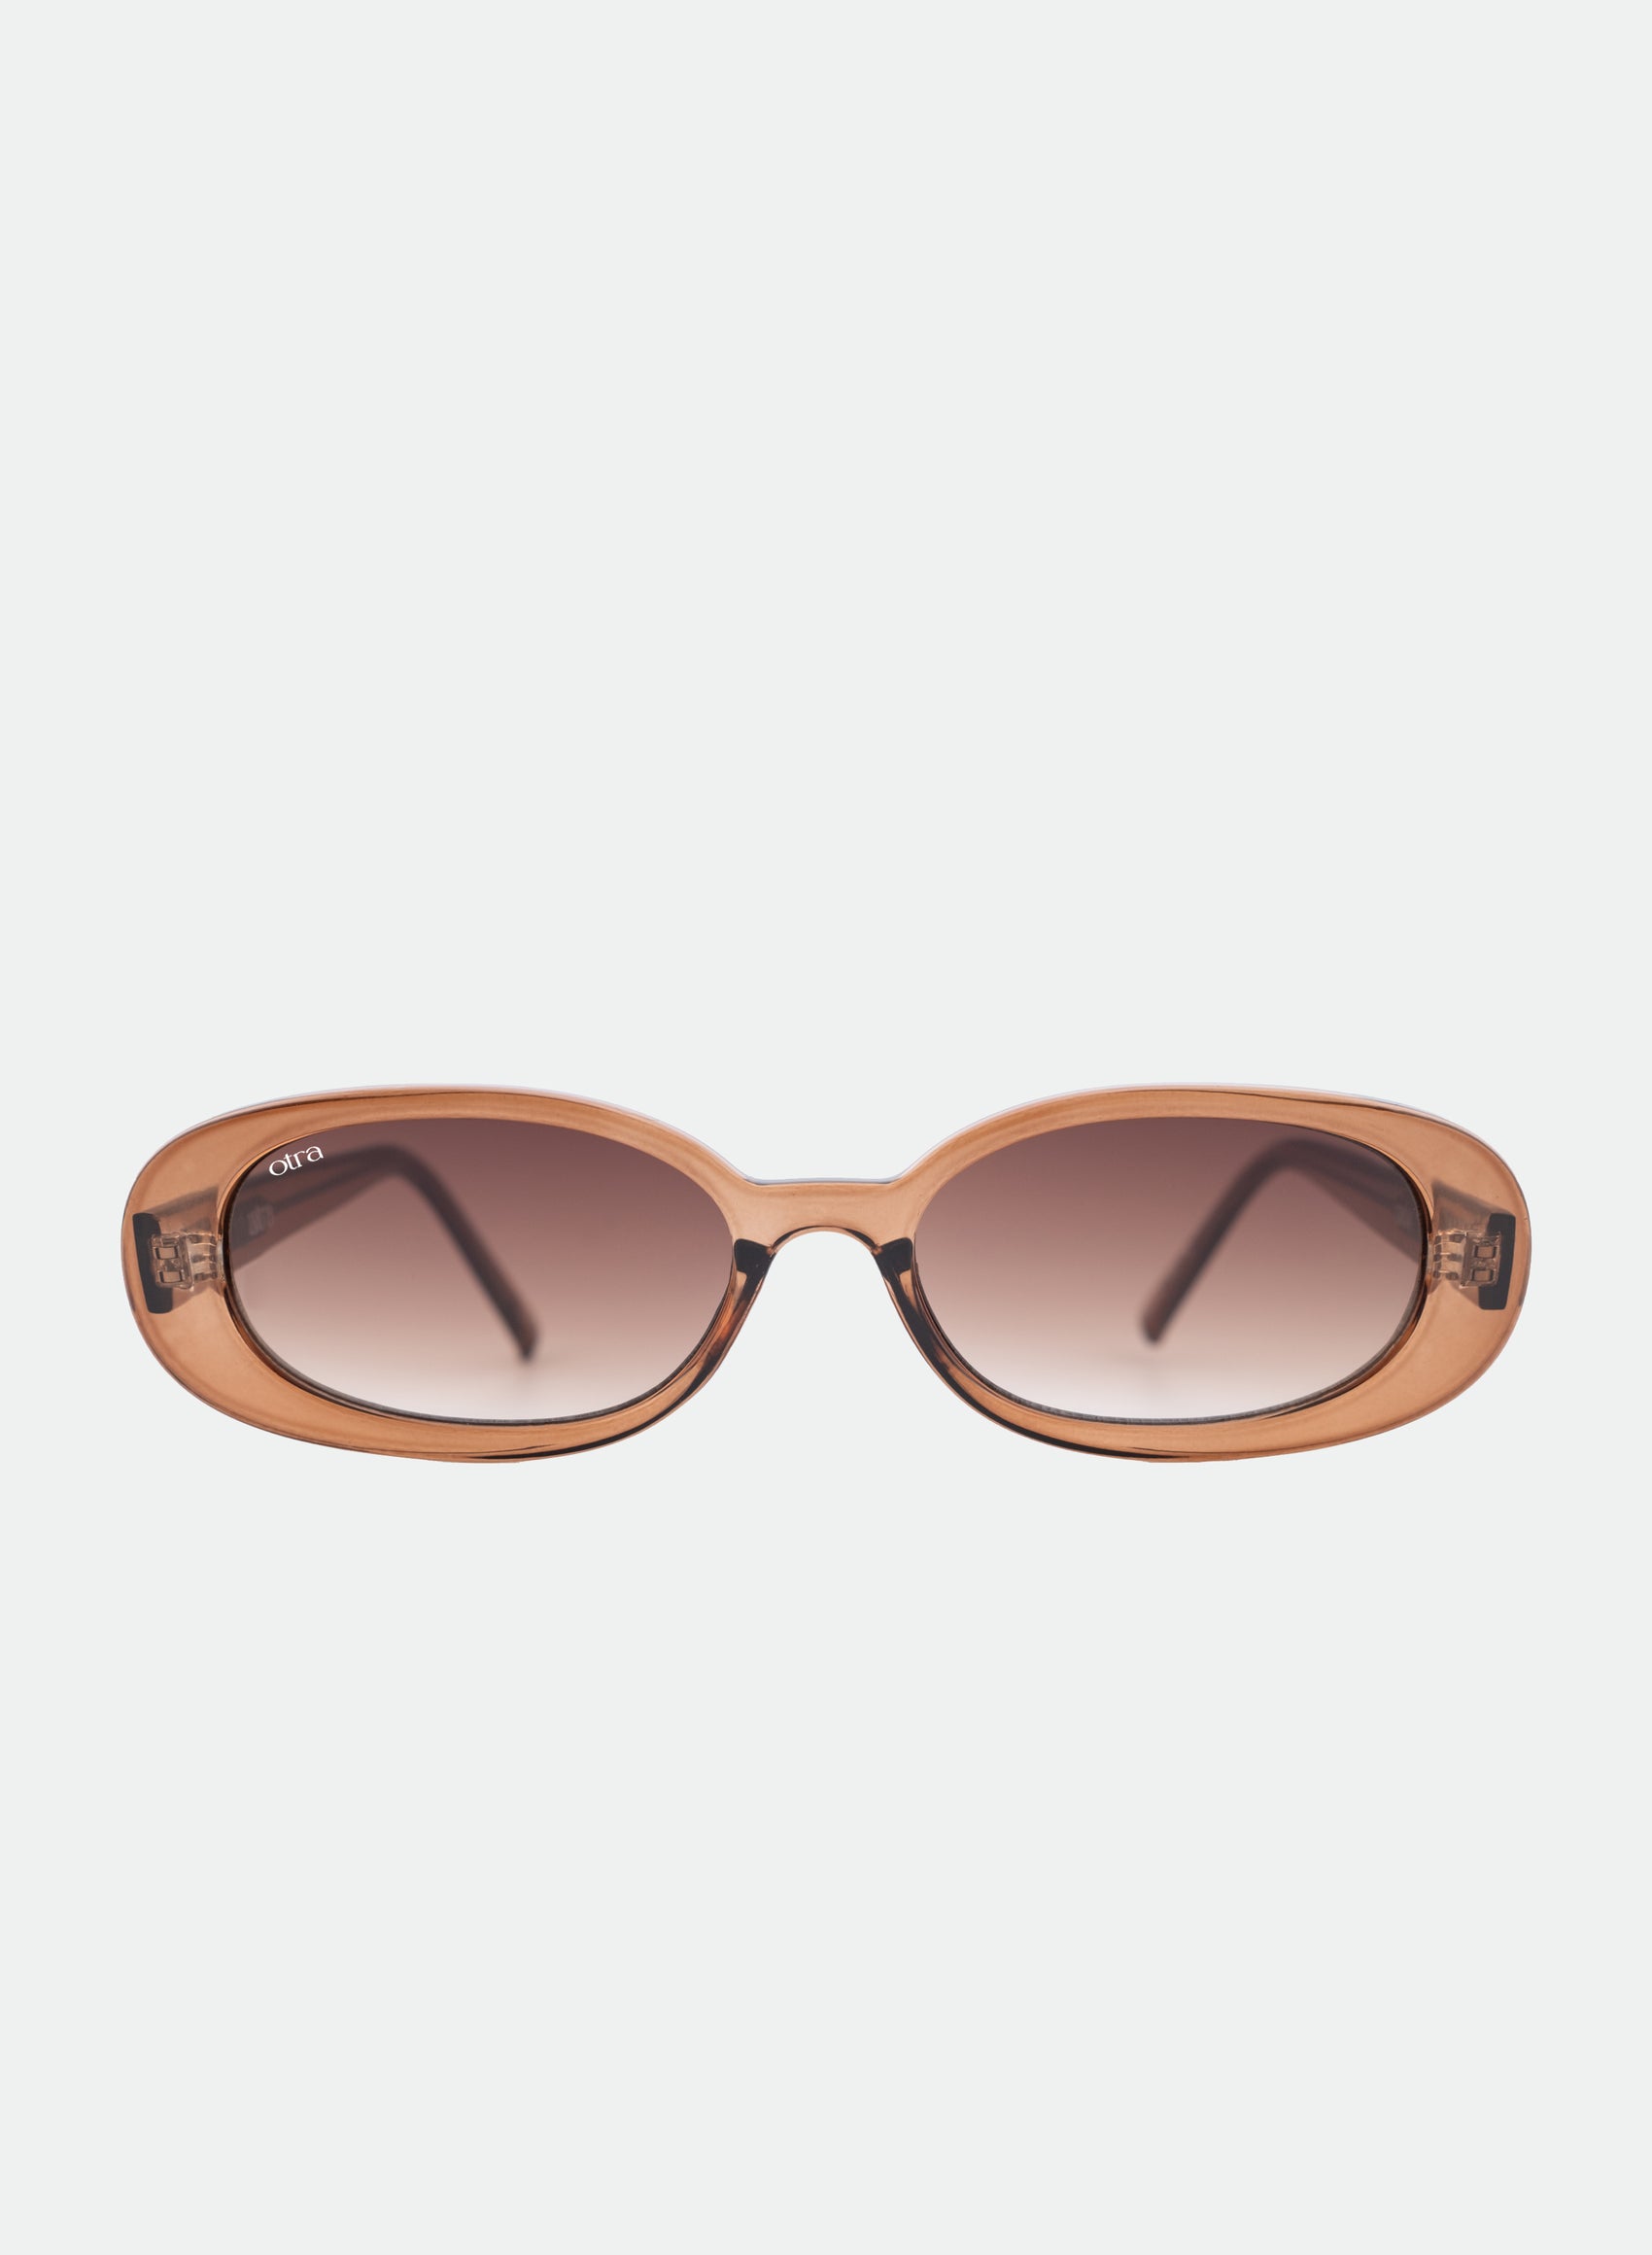 Gina sunglasses in coffee front view